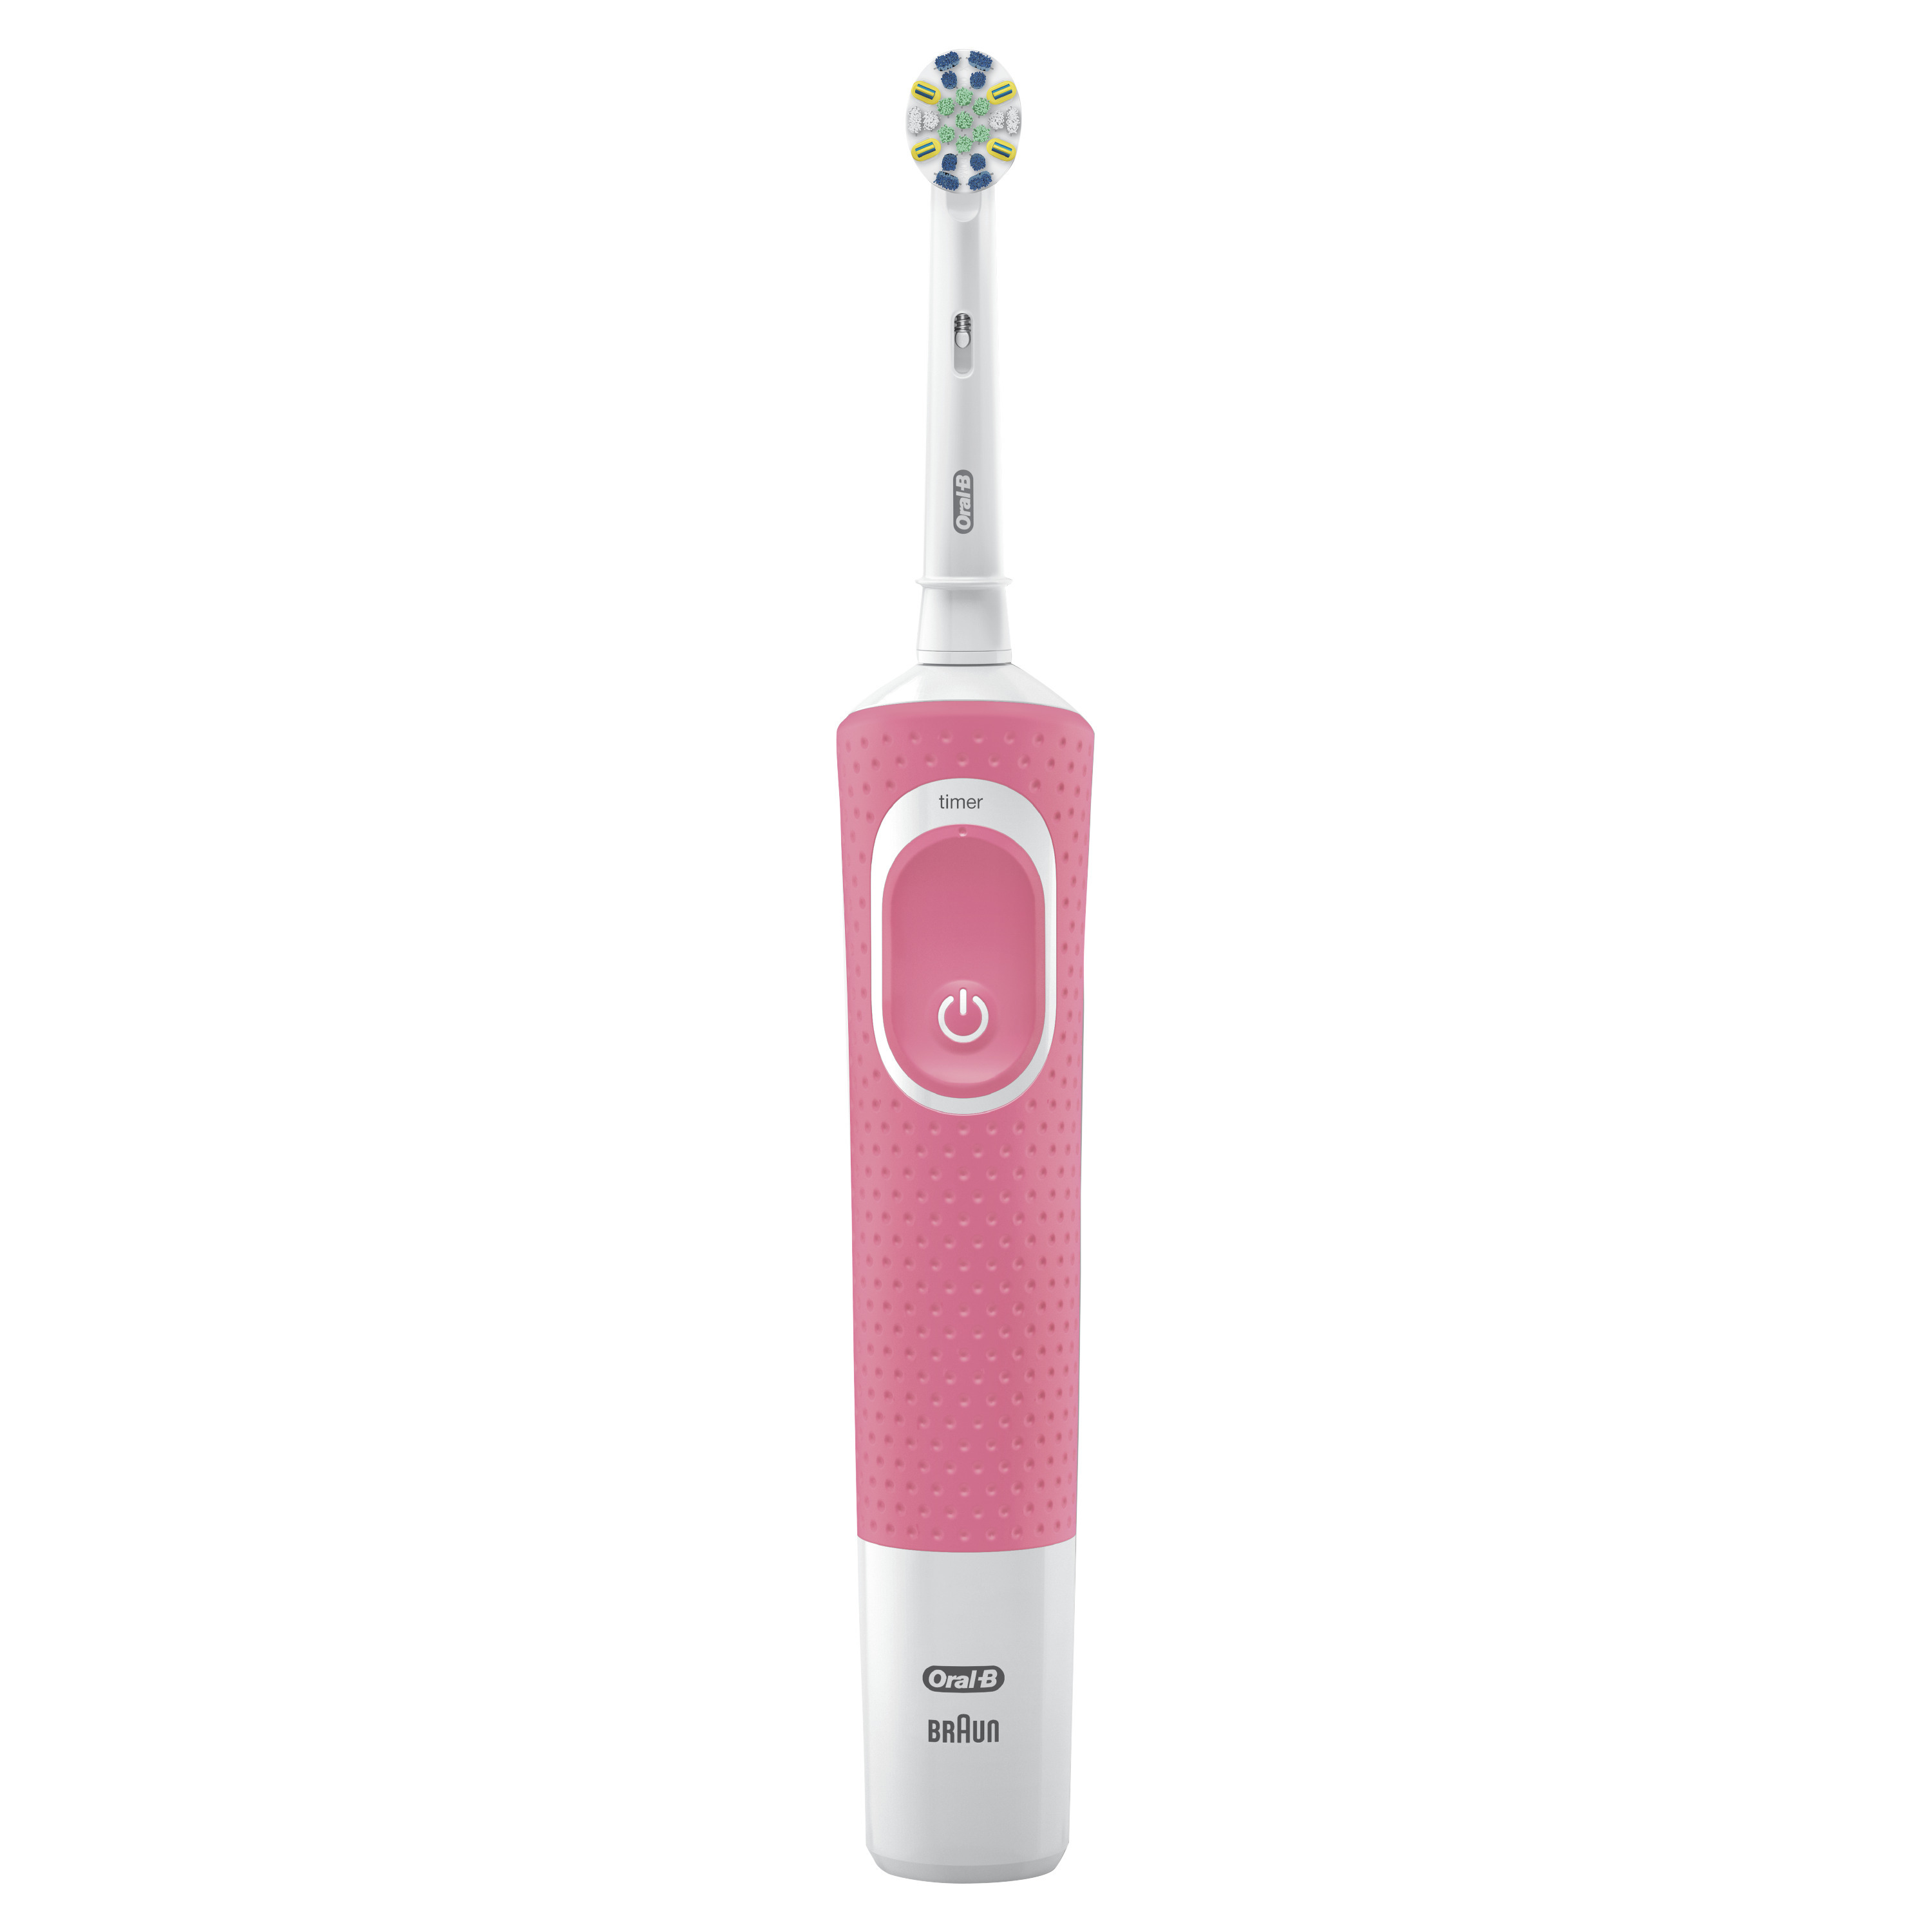 Oral-B Vitality Flossaction Rechargeable Electric Toothbrush, Pink, for Adults & Children 3+ - image 2 of 8